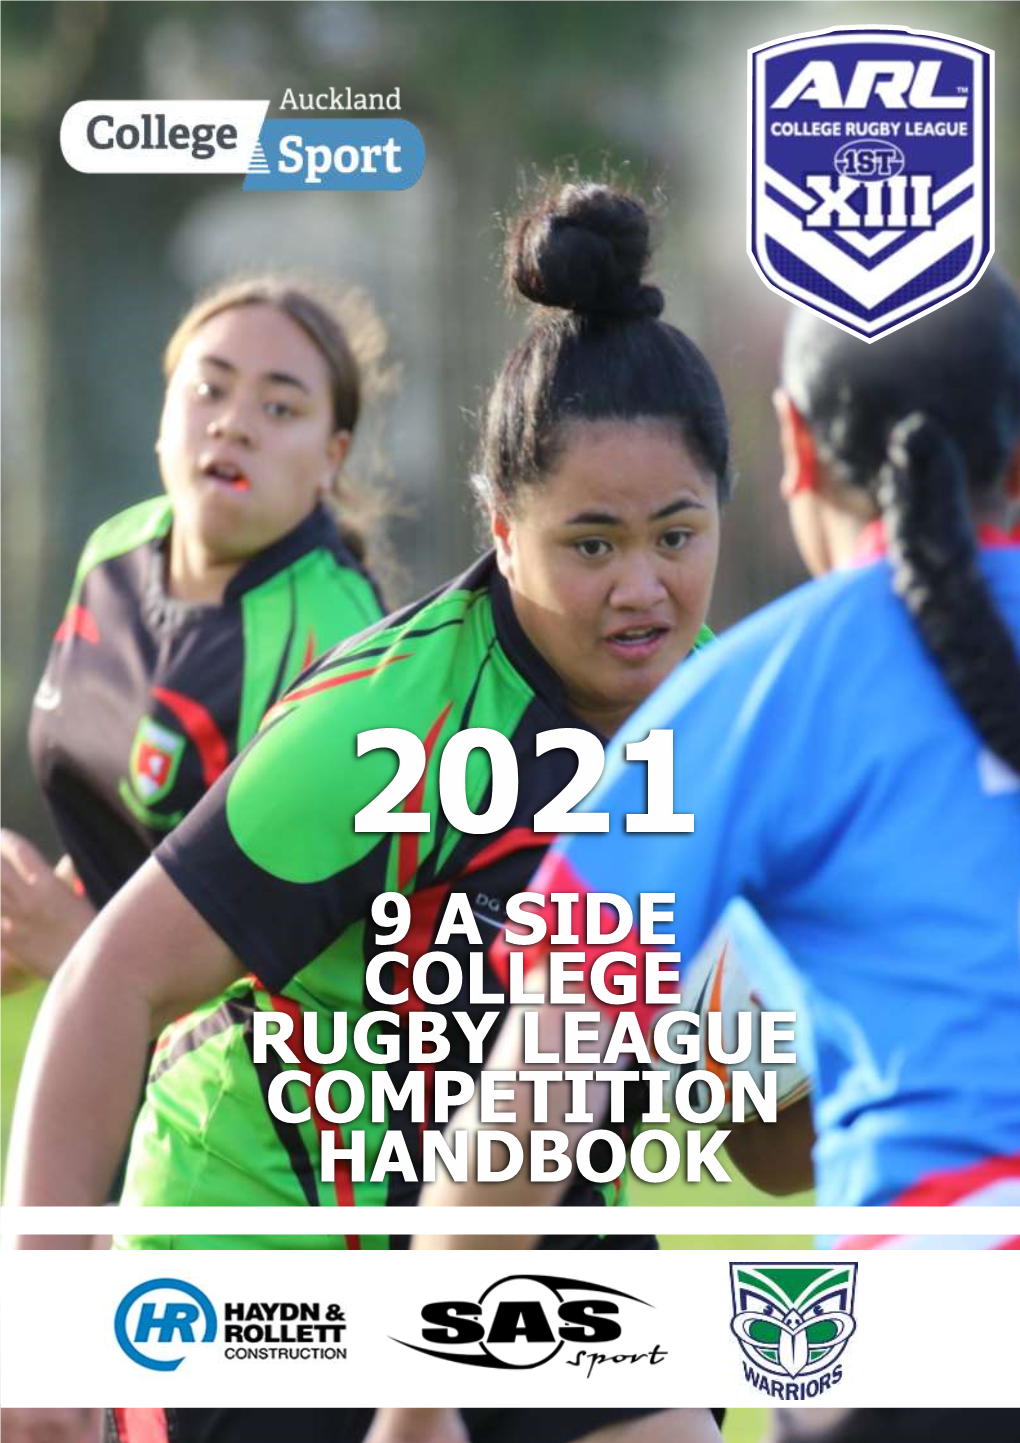 9 a Side College Rugby League Competition Handbook